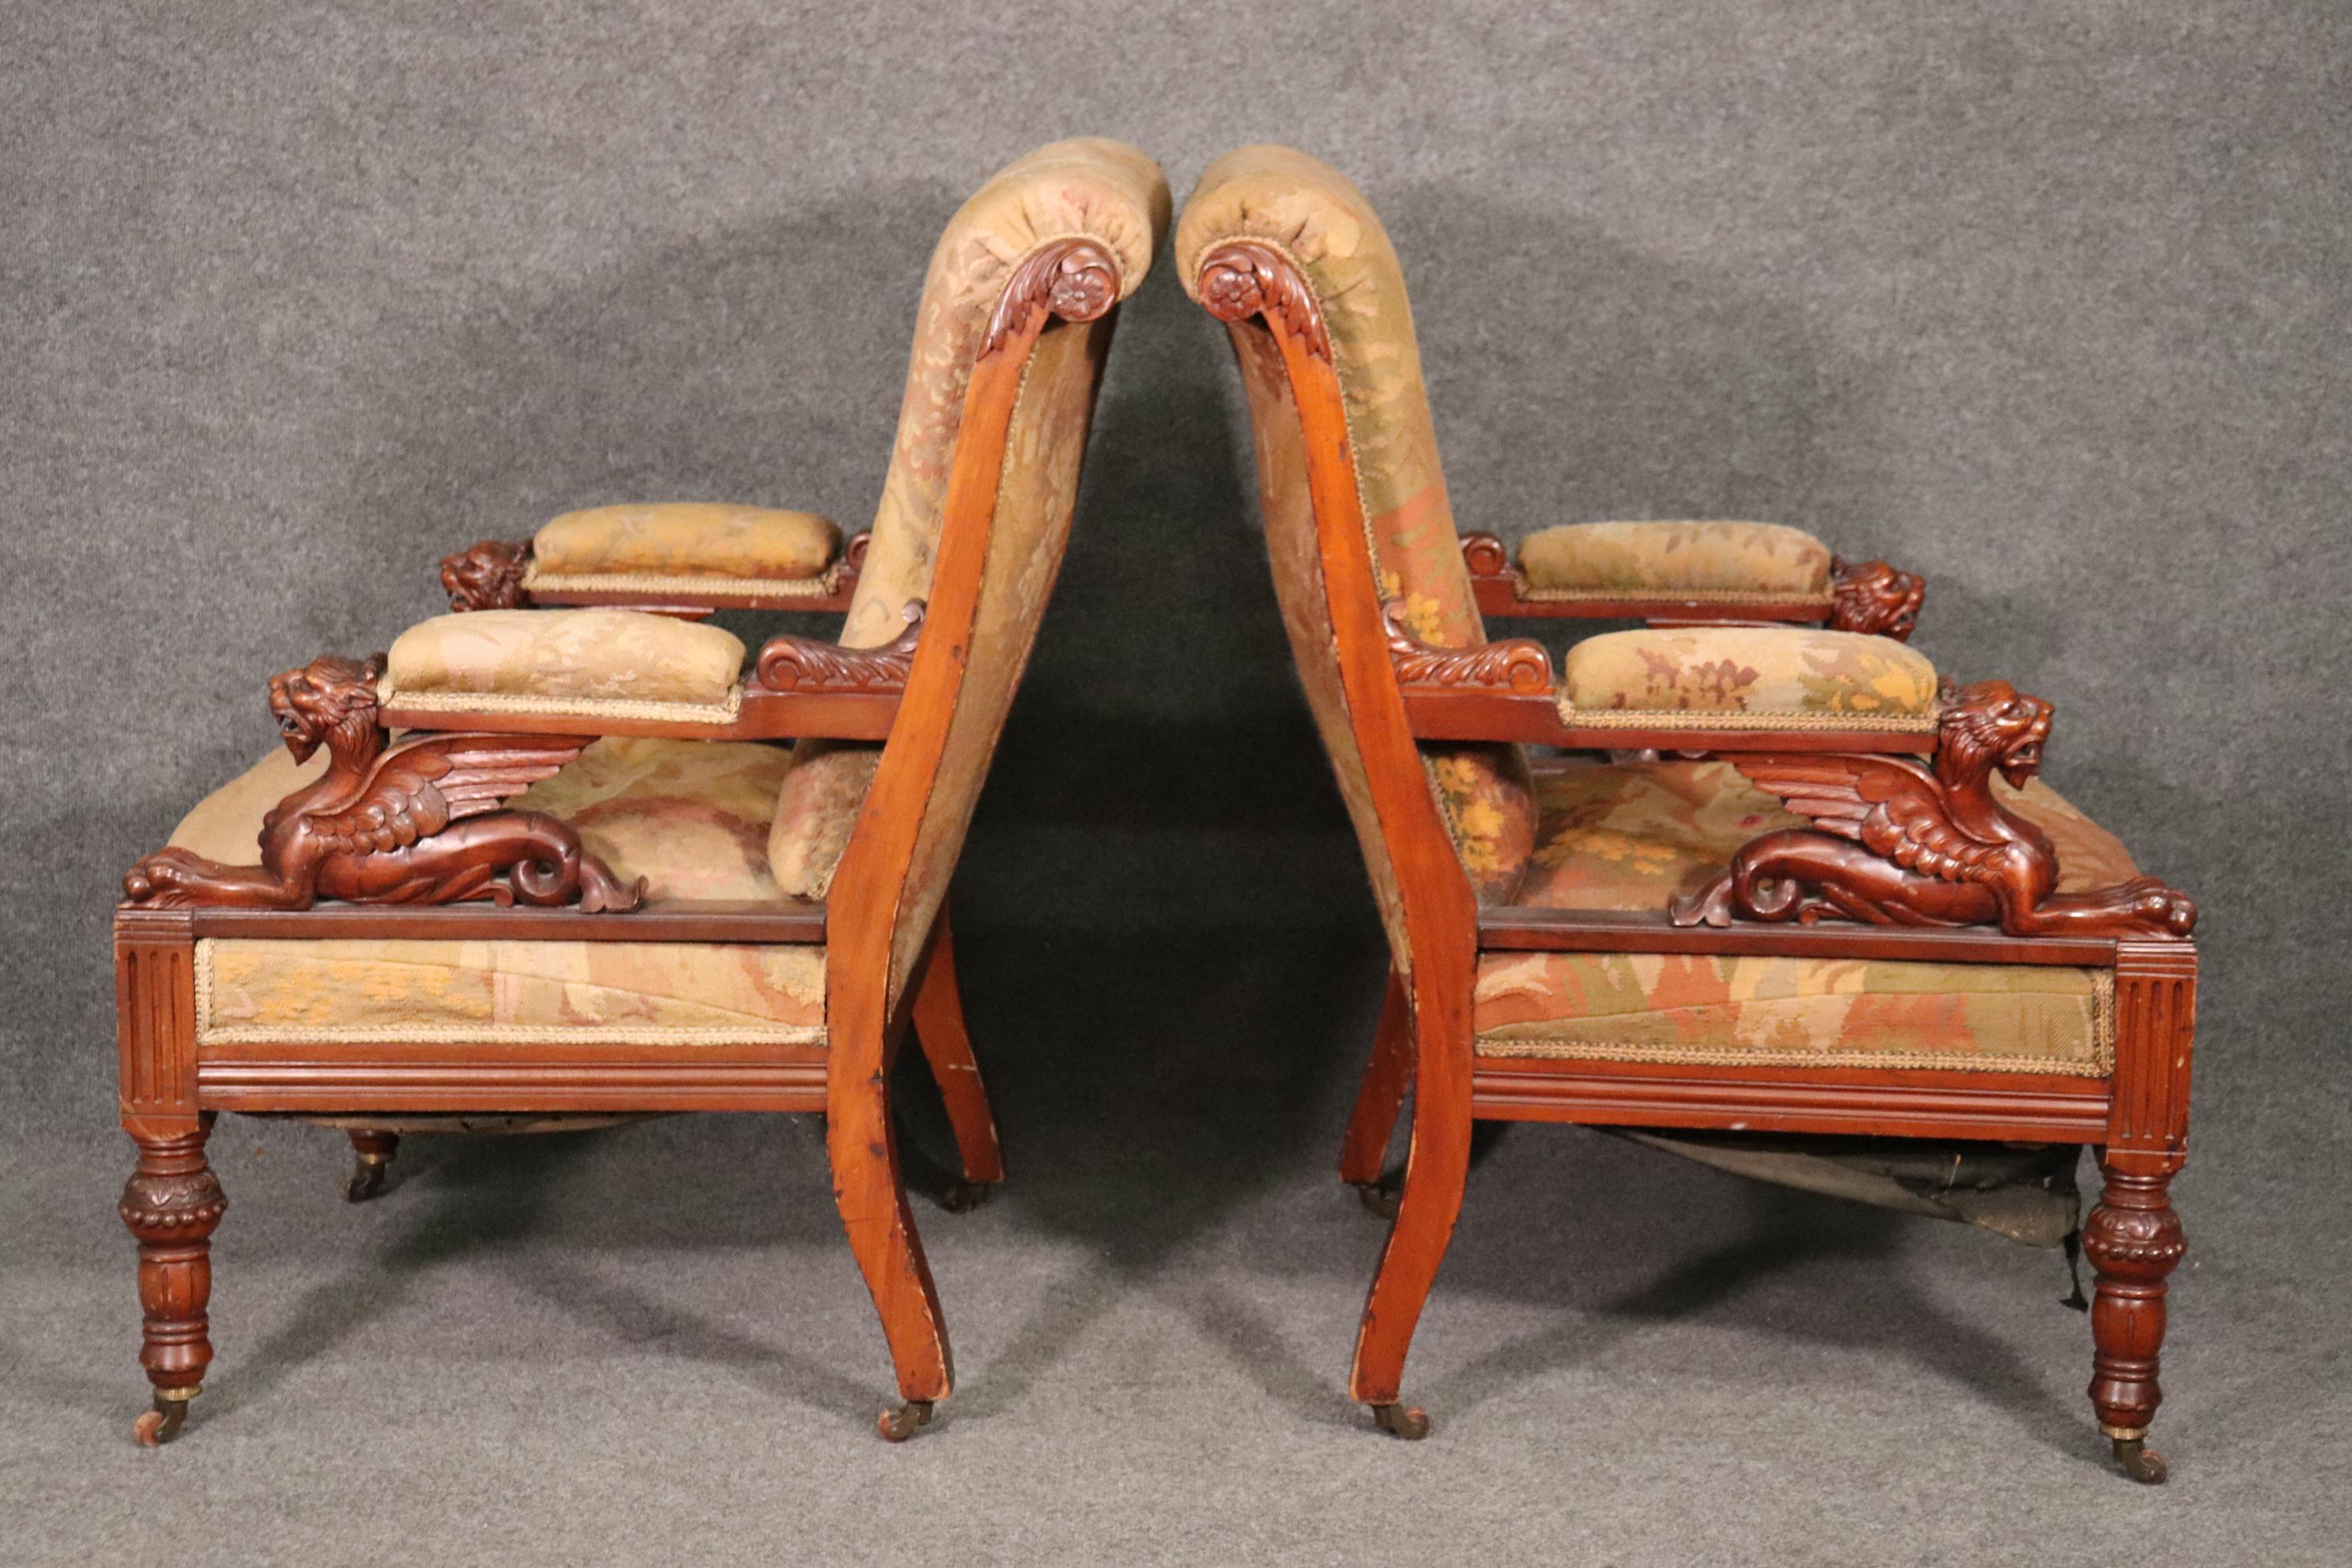 Late 19th Century Matched Pair RJ Horner Carved Walnut Griffin Club Parlor Chairs, circa 1870